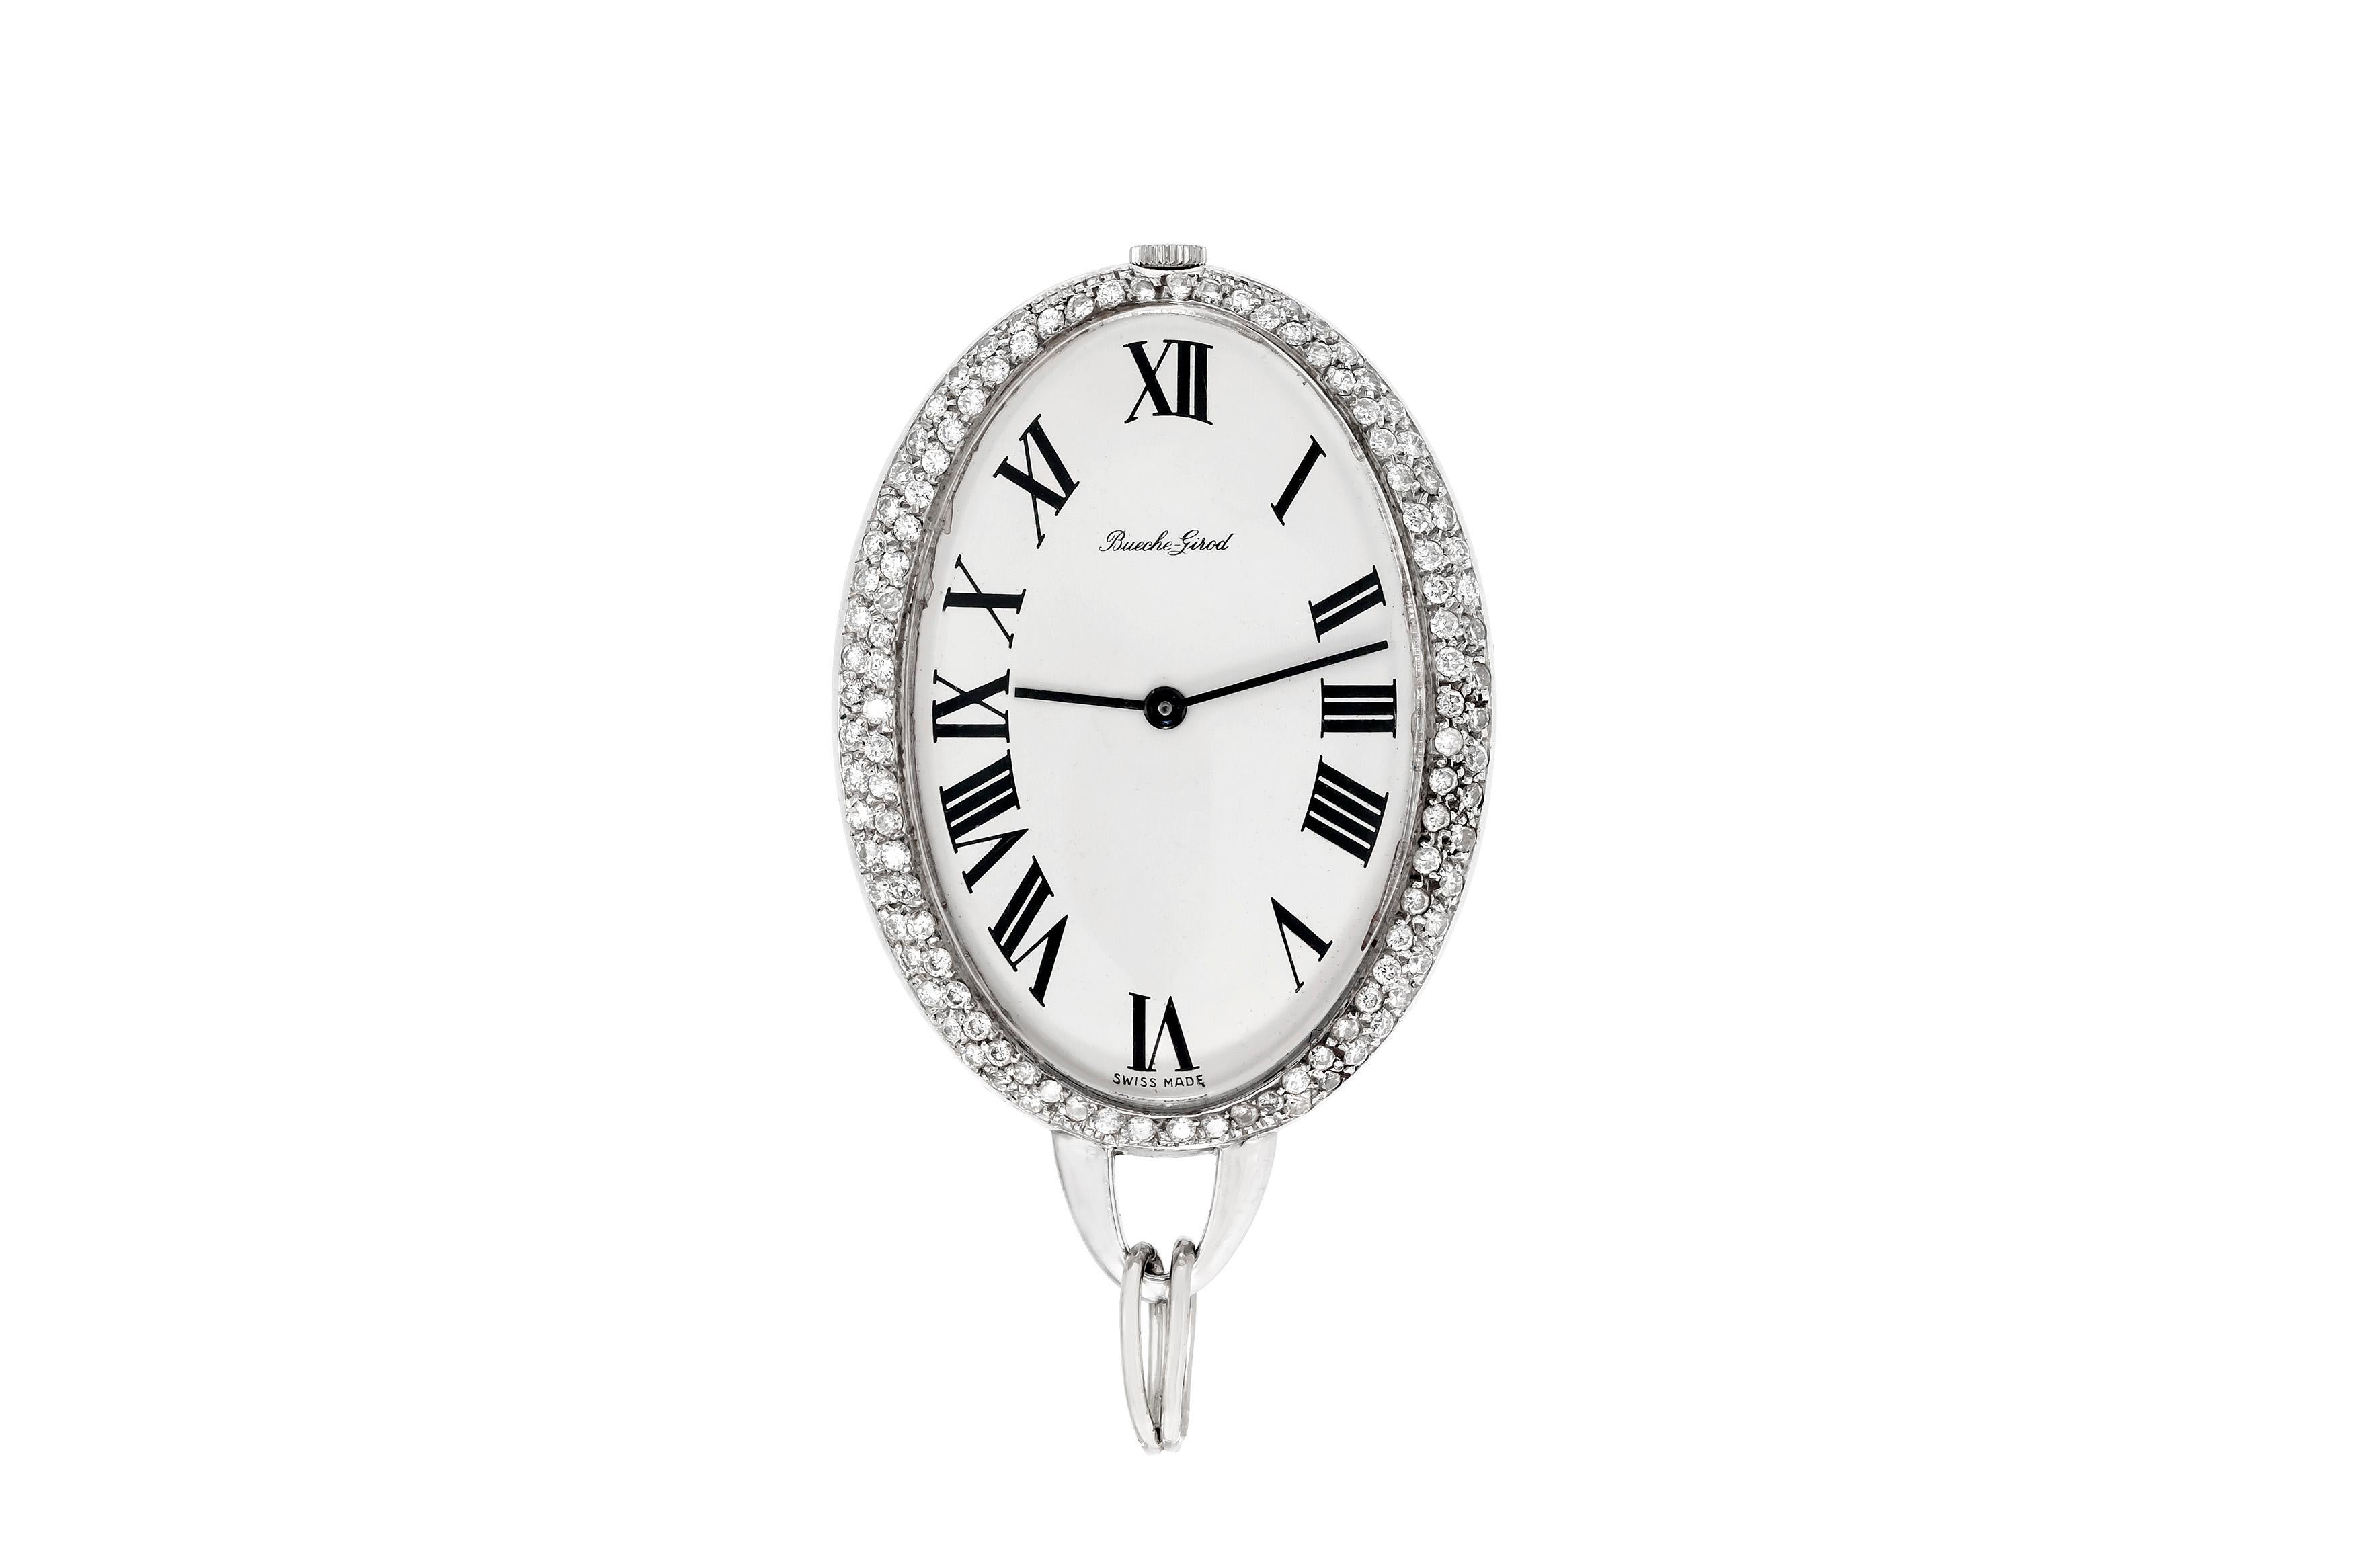 Beautiful Bueche-Girod pocket watch circa 1970 is finely crafted in platinum. The diamonds weigh approximately 6.00 carat.